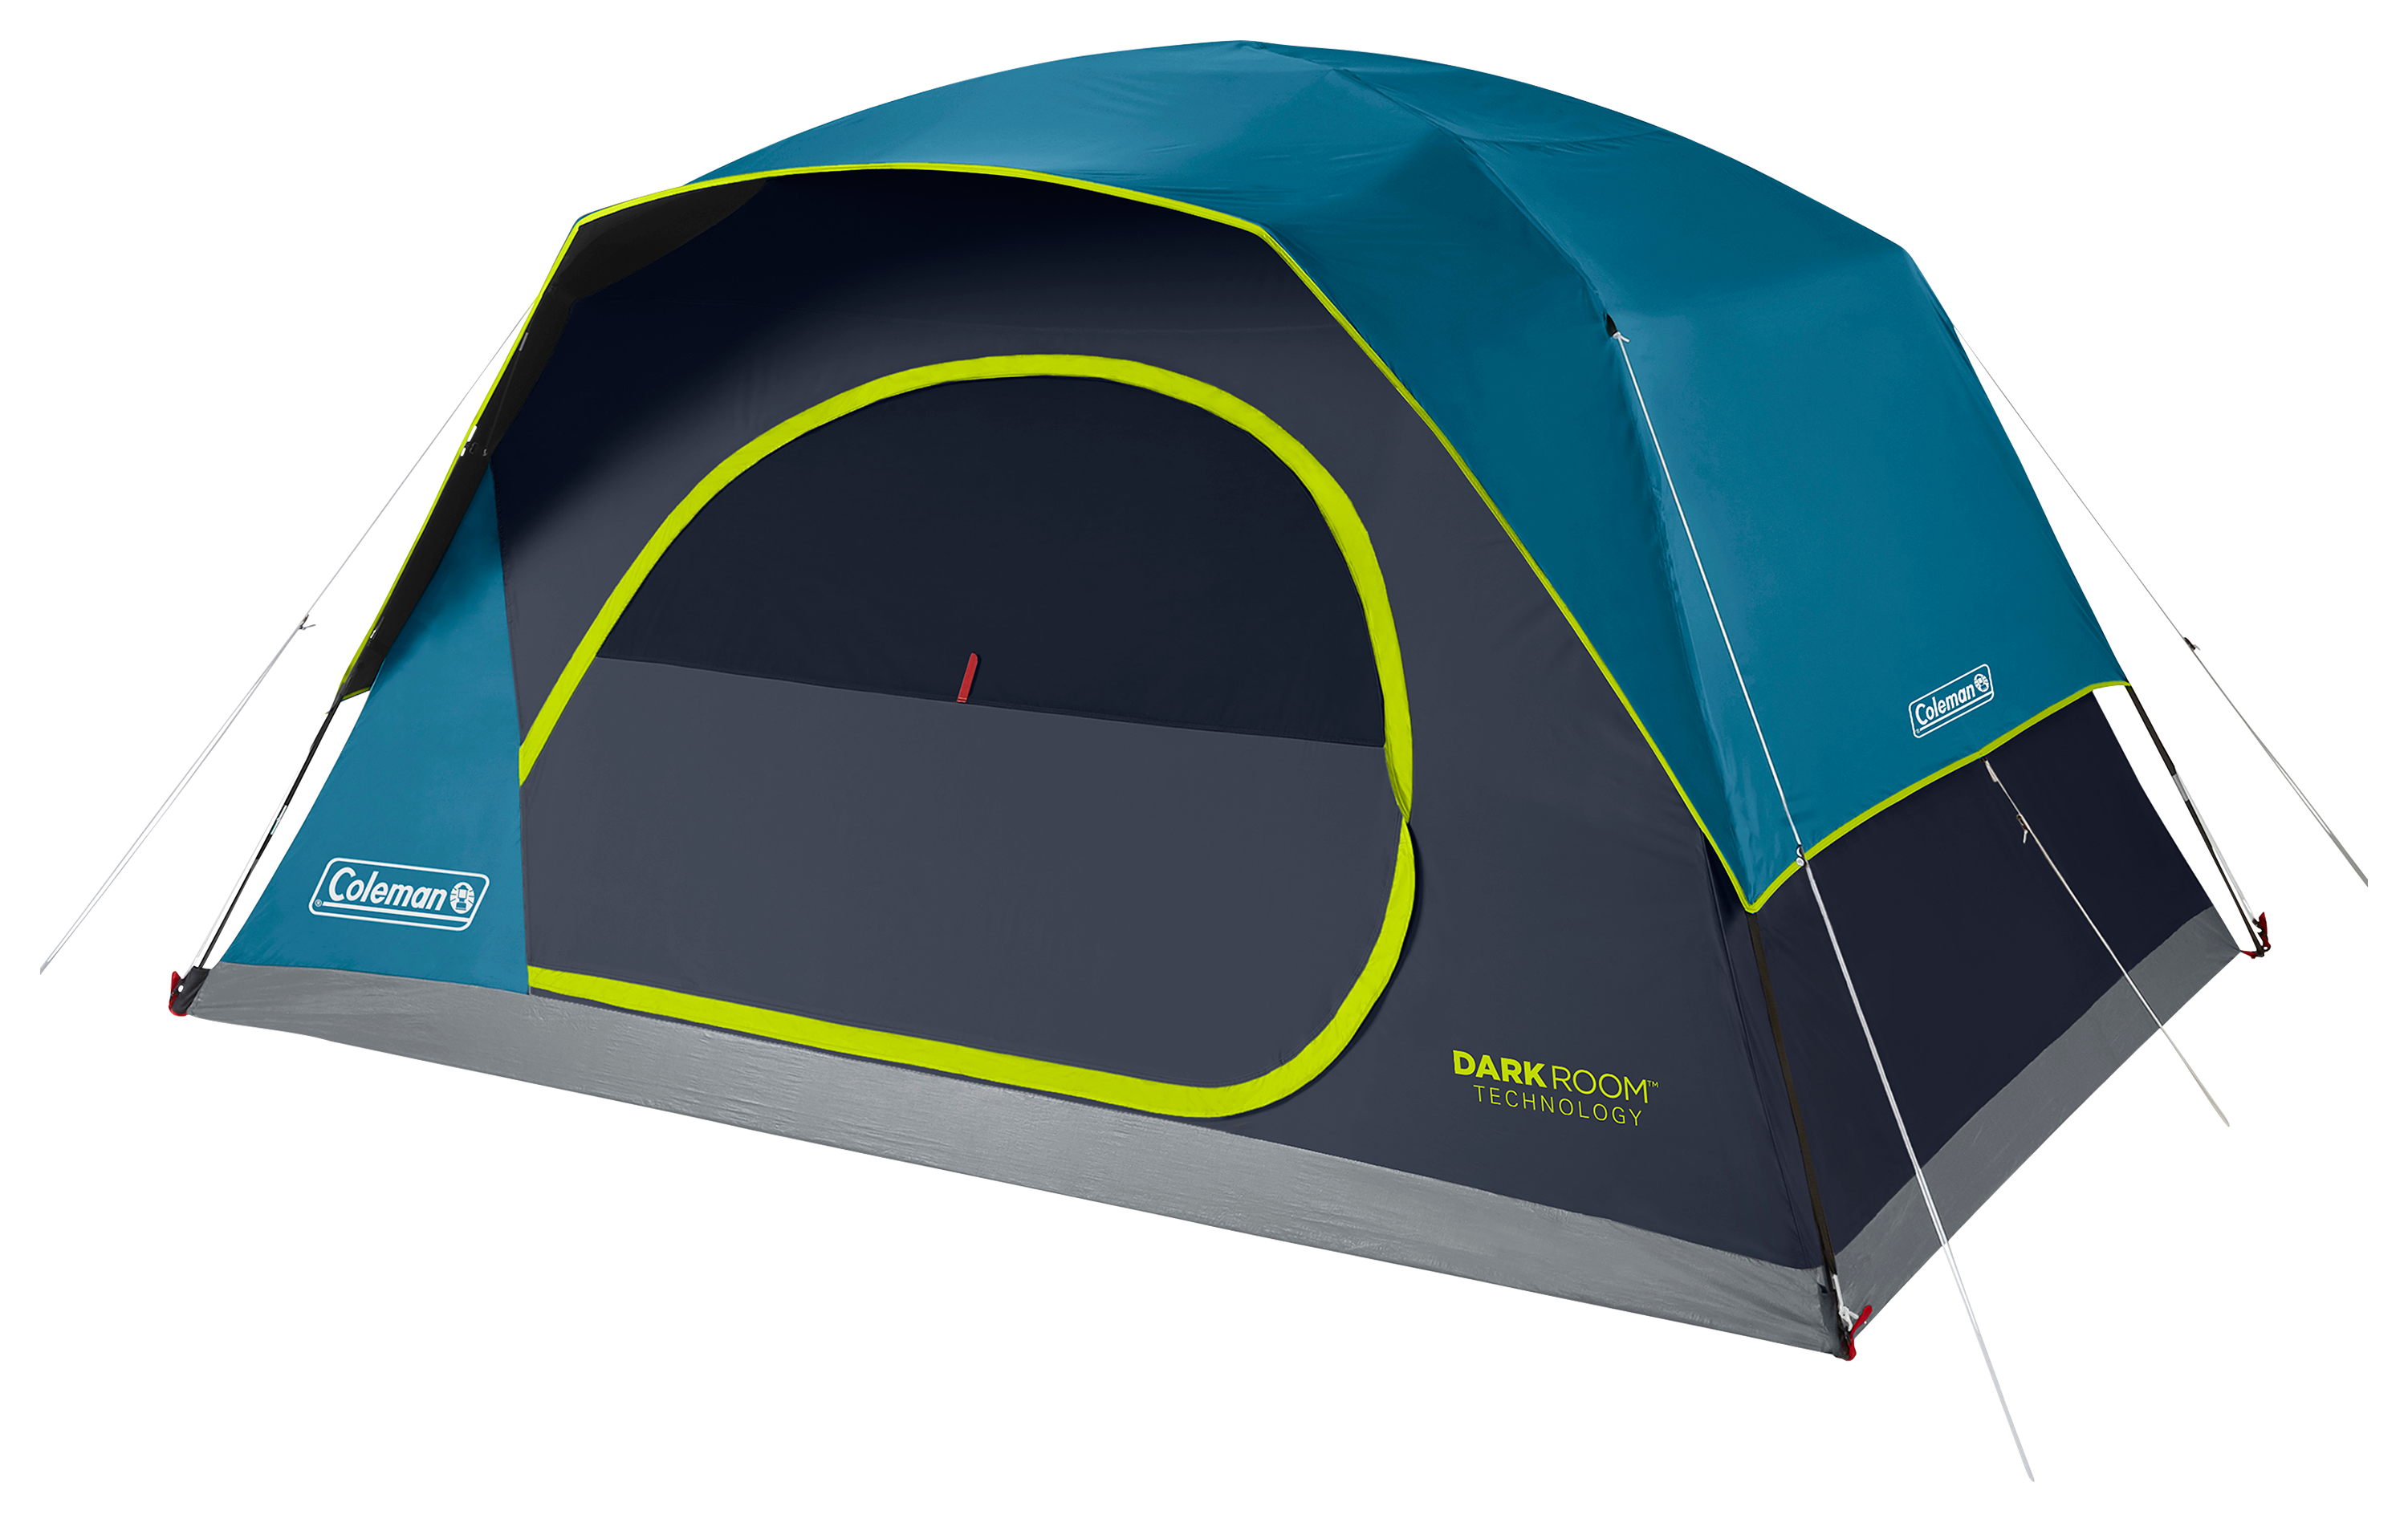 Vijandig oven holte Coleman Dark Room Skydome 8-Person Camping Tent | Cabela's